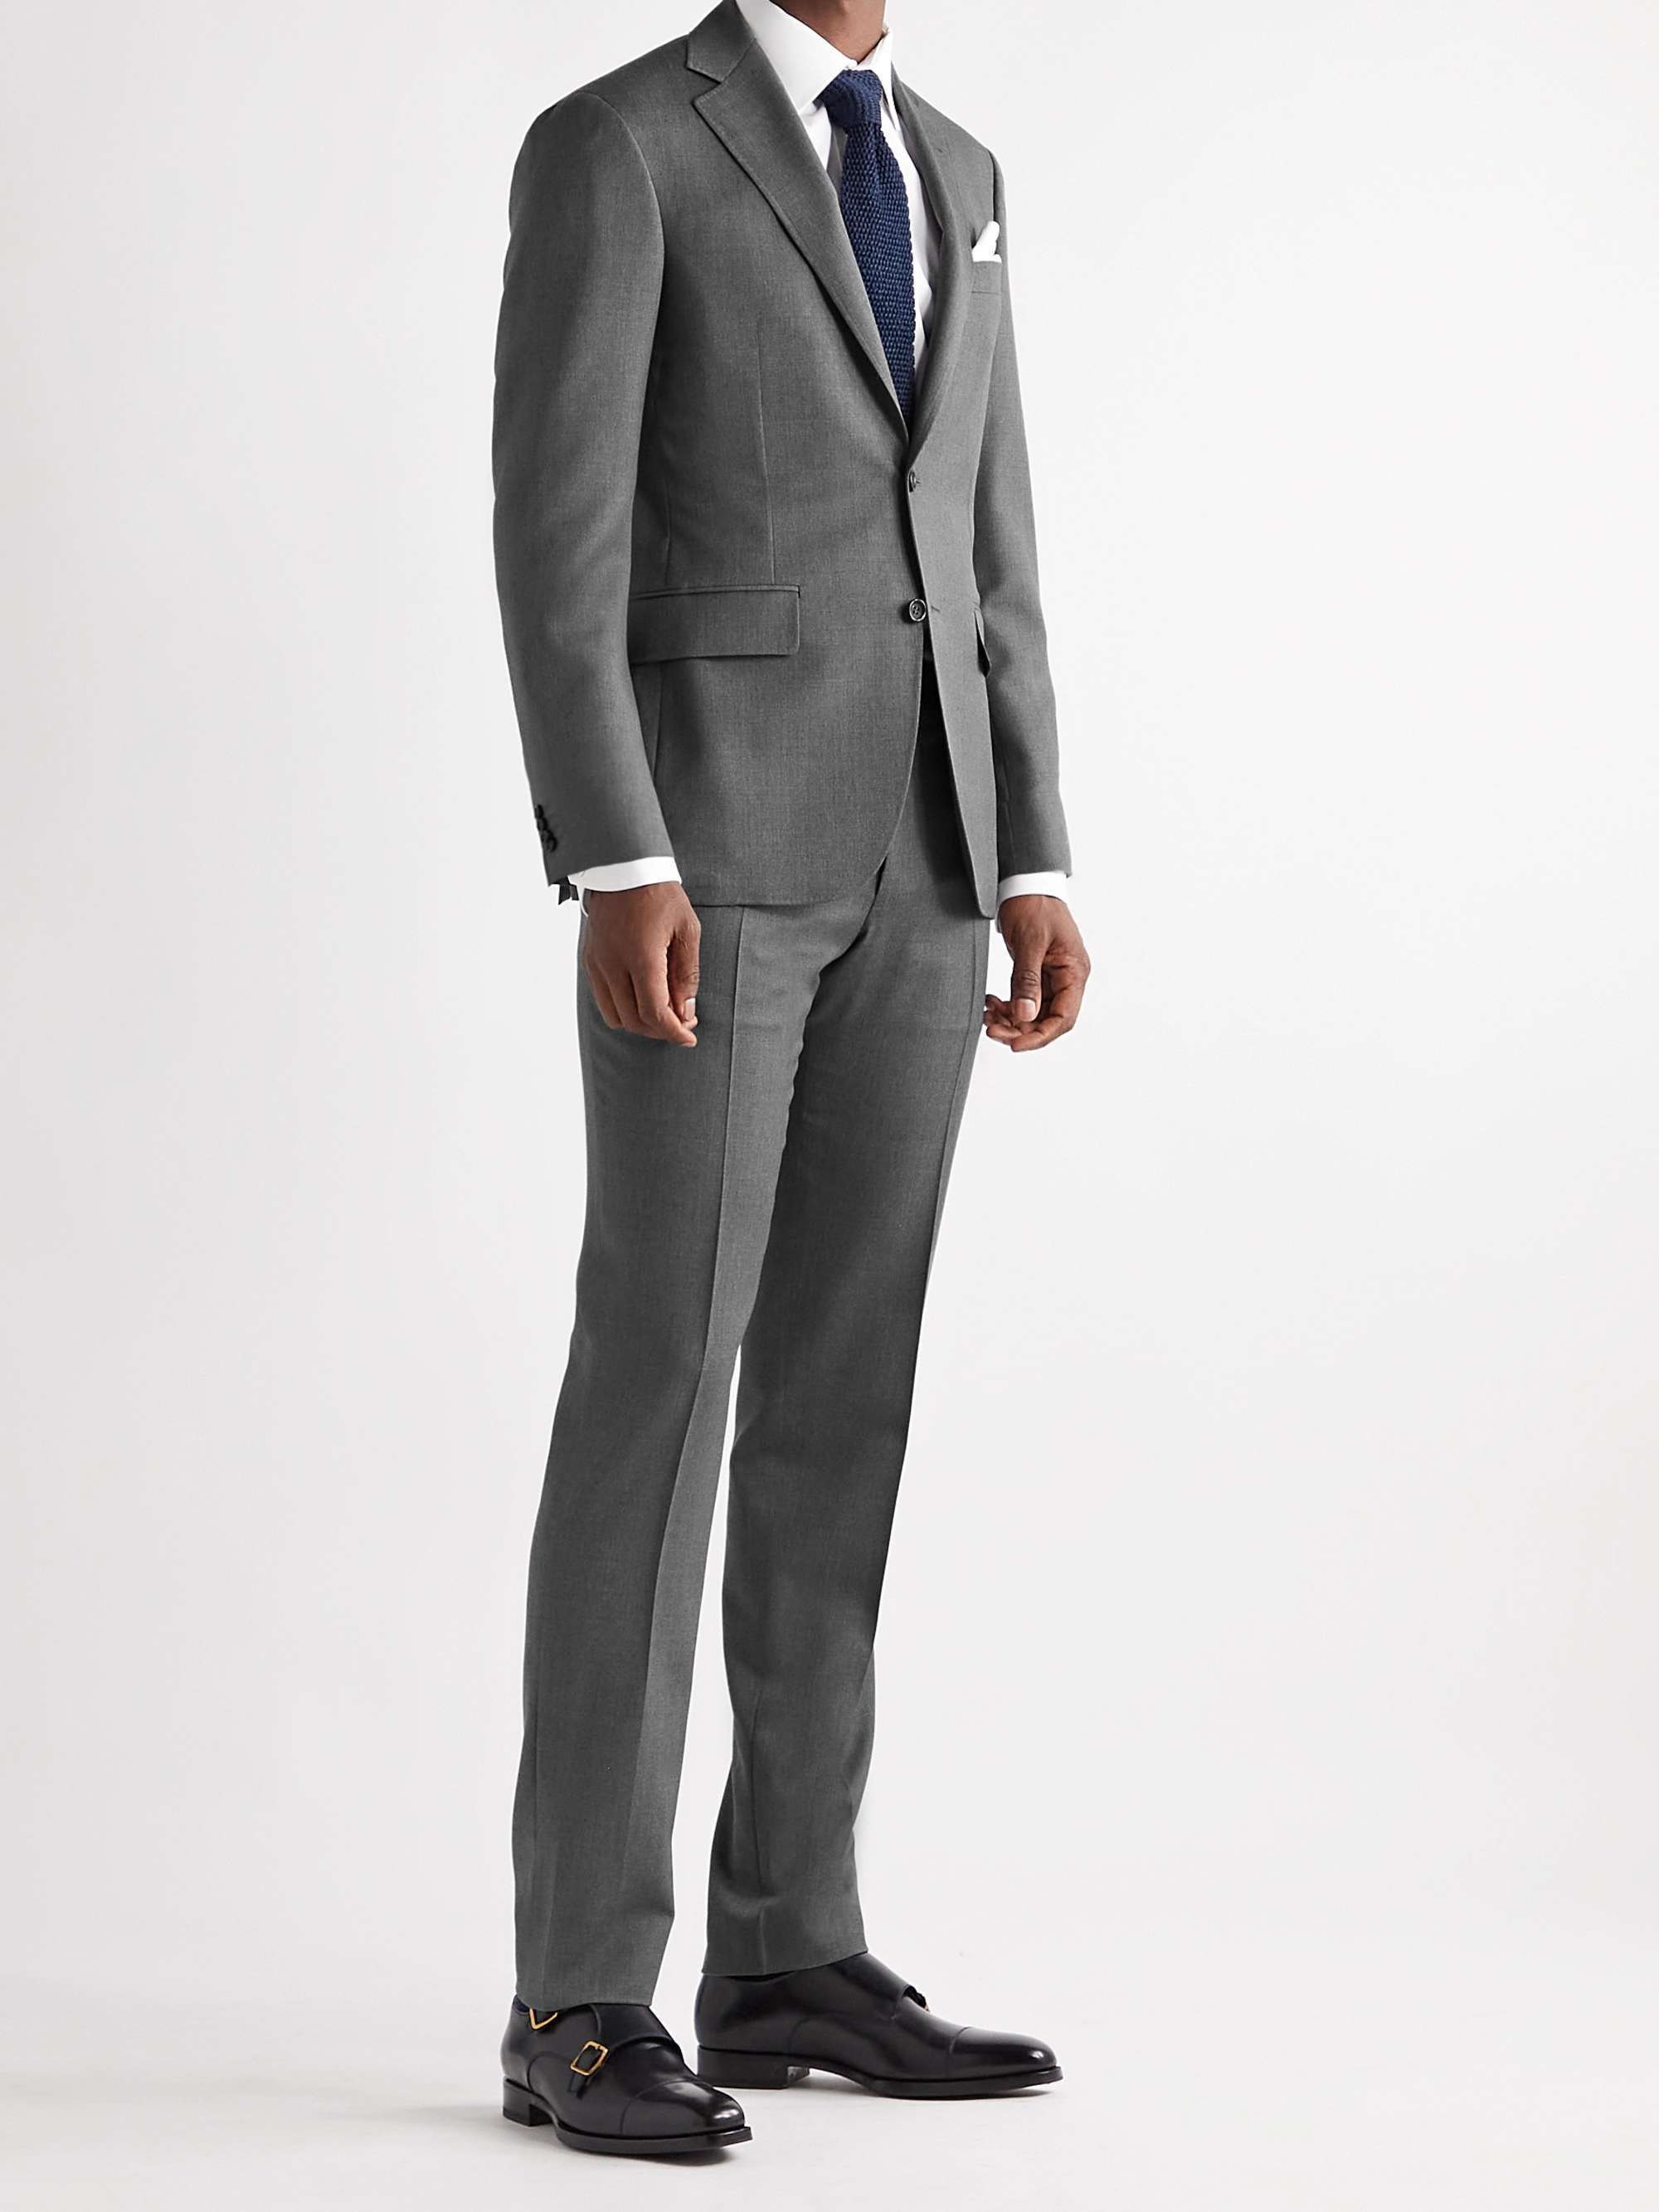 CANALI Kei Slim-Fit Unstructured Wool Suit Jacket for Men | MR PORTER